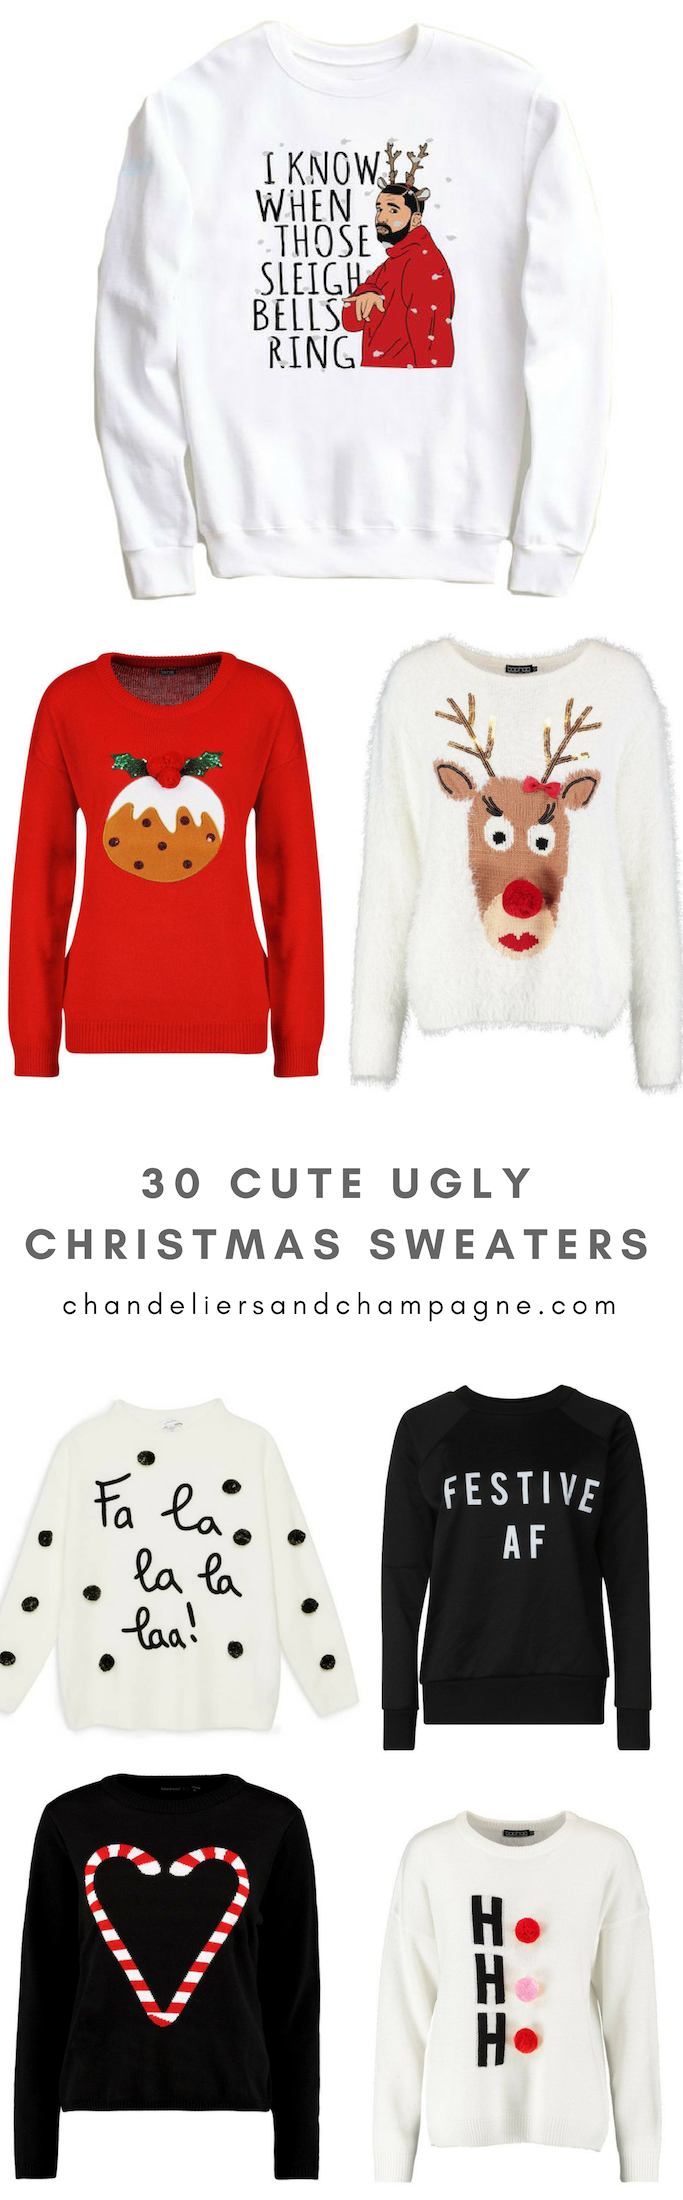 30 Cute Ugly Christmas Sweaters For Women that Sleigh in 2018 • The Tackiest, Cutest Ugly Christmas Sweaters of 2018